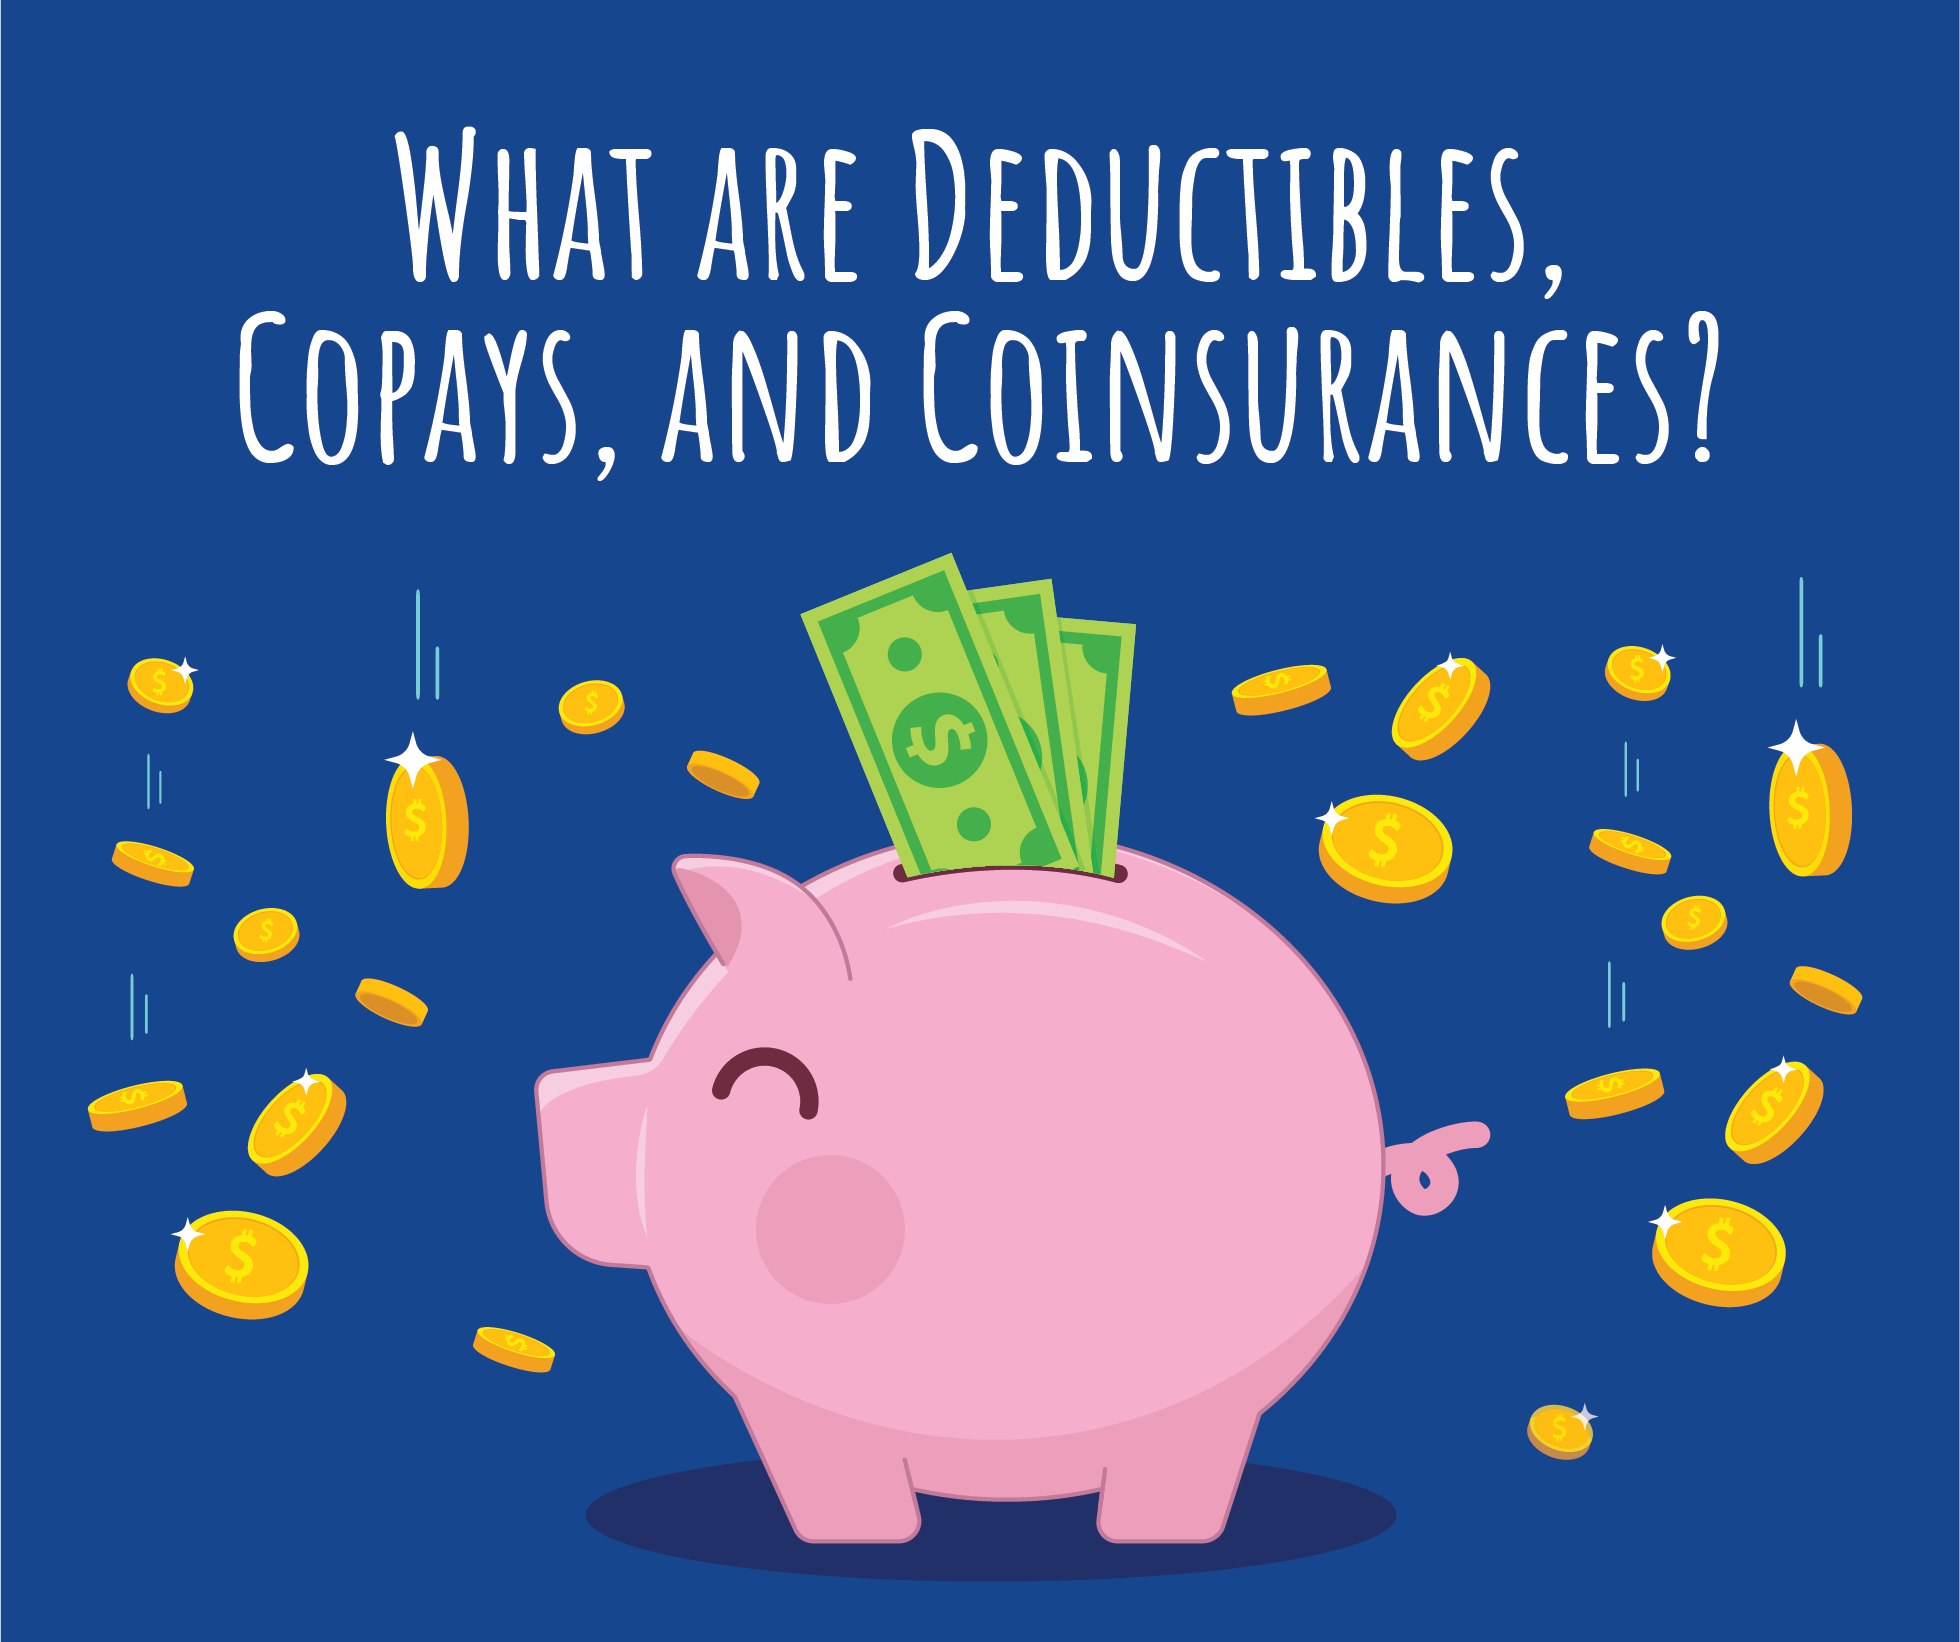 What are Deductibles, Copays, and Coinsurances?